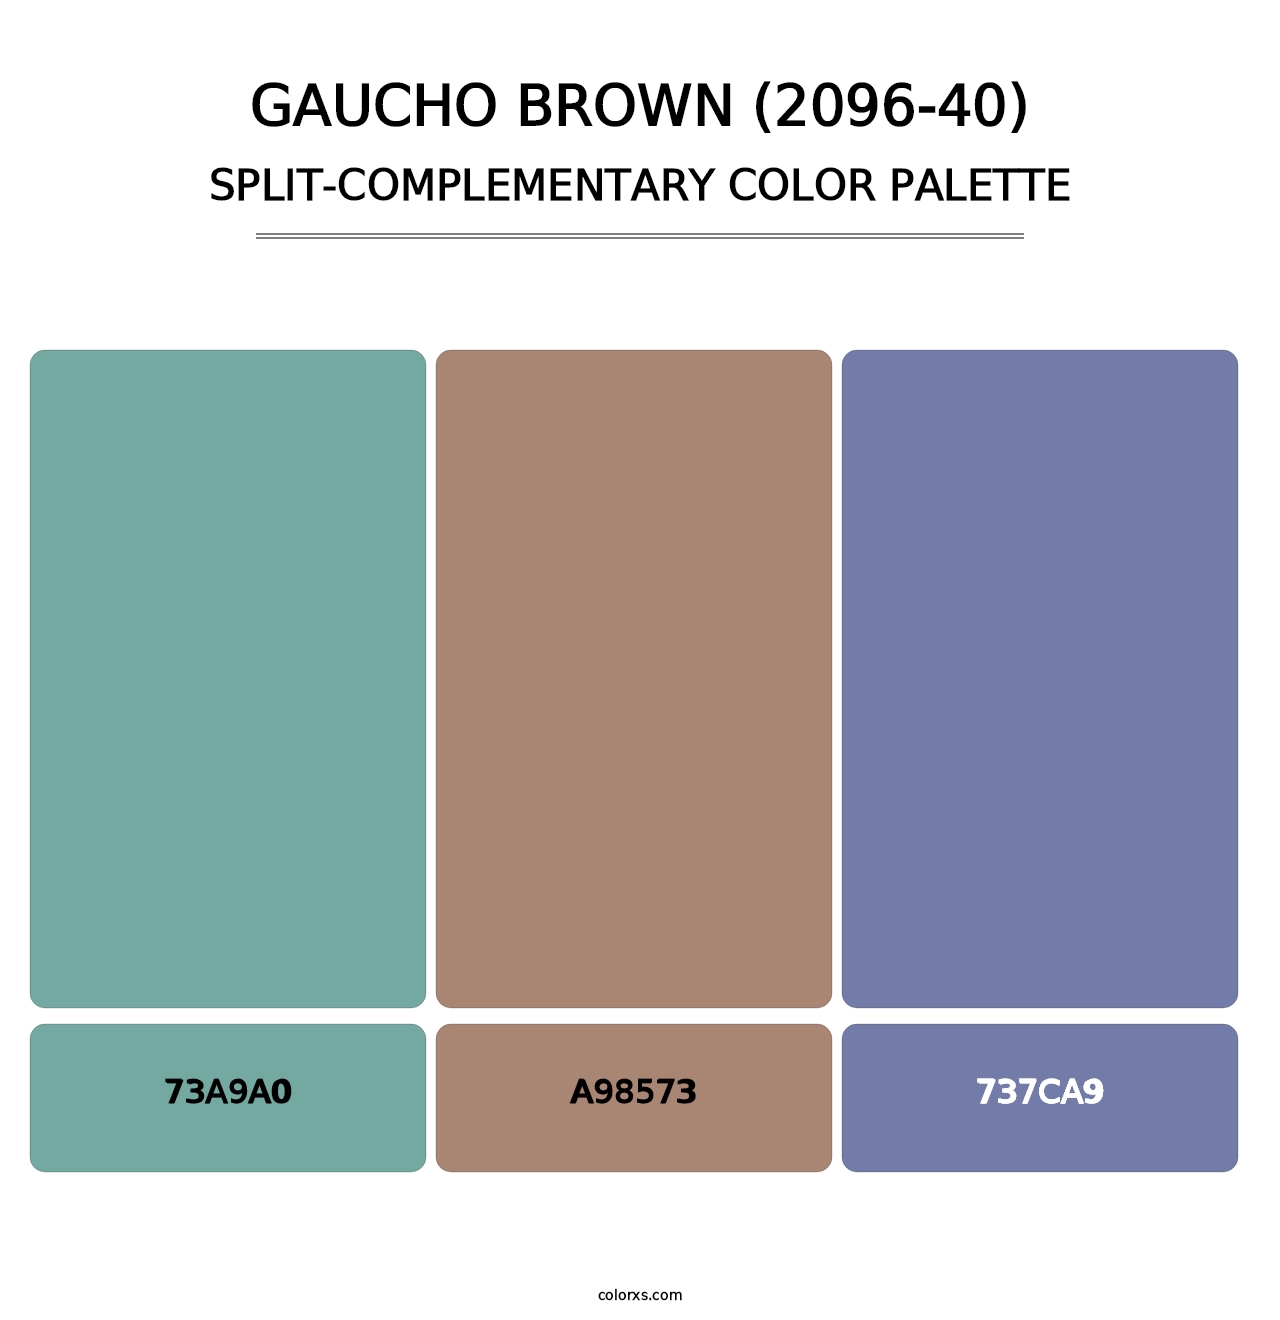 Gaucho Brown (2096-40) - Split-Complementary Color Palette